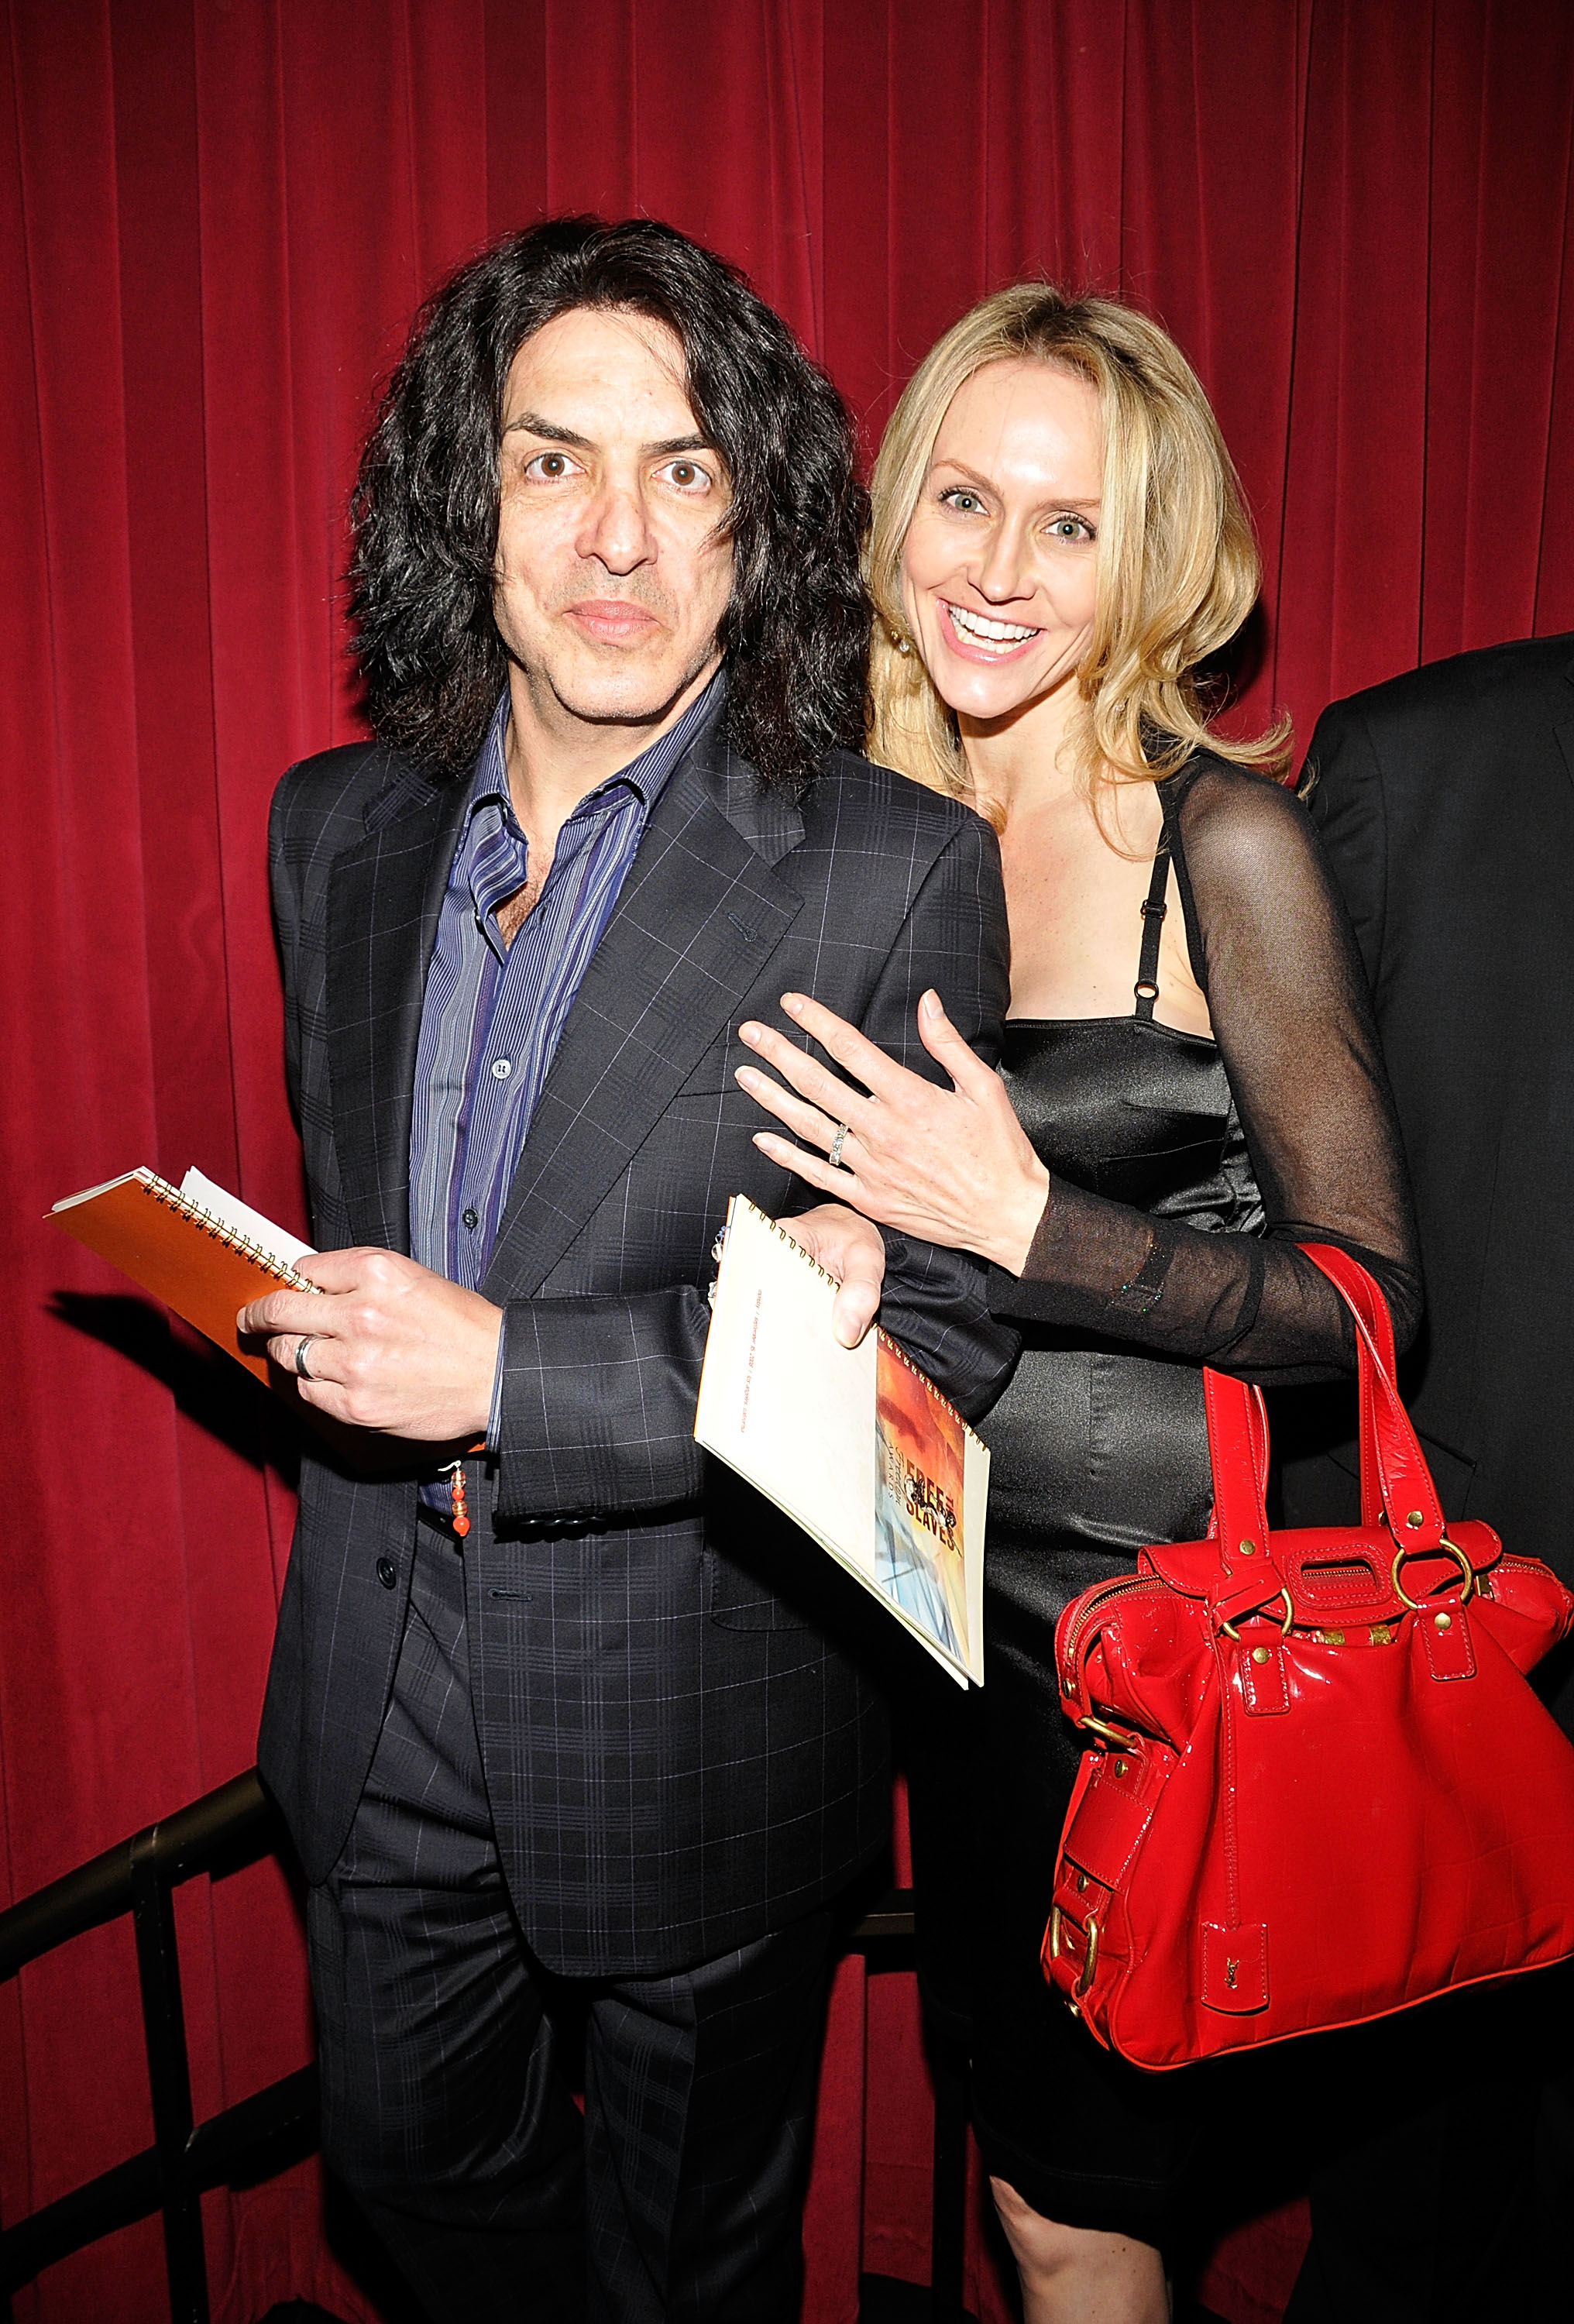 Paul Stanley of KISS arrives with wife Erin Sutton at the 2008 Freedom Awards to combat international slavery and human trafficking, held at the University of Southern California on September 15, 2008 in Los Angeles, California | Source: Getty Images